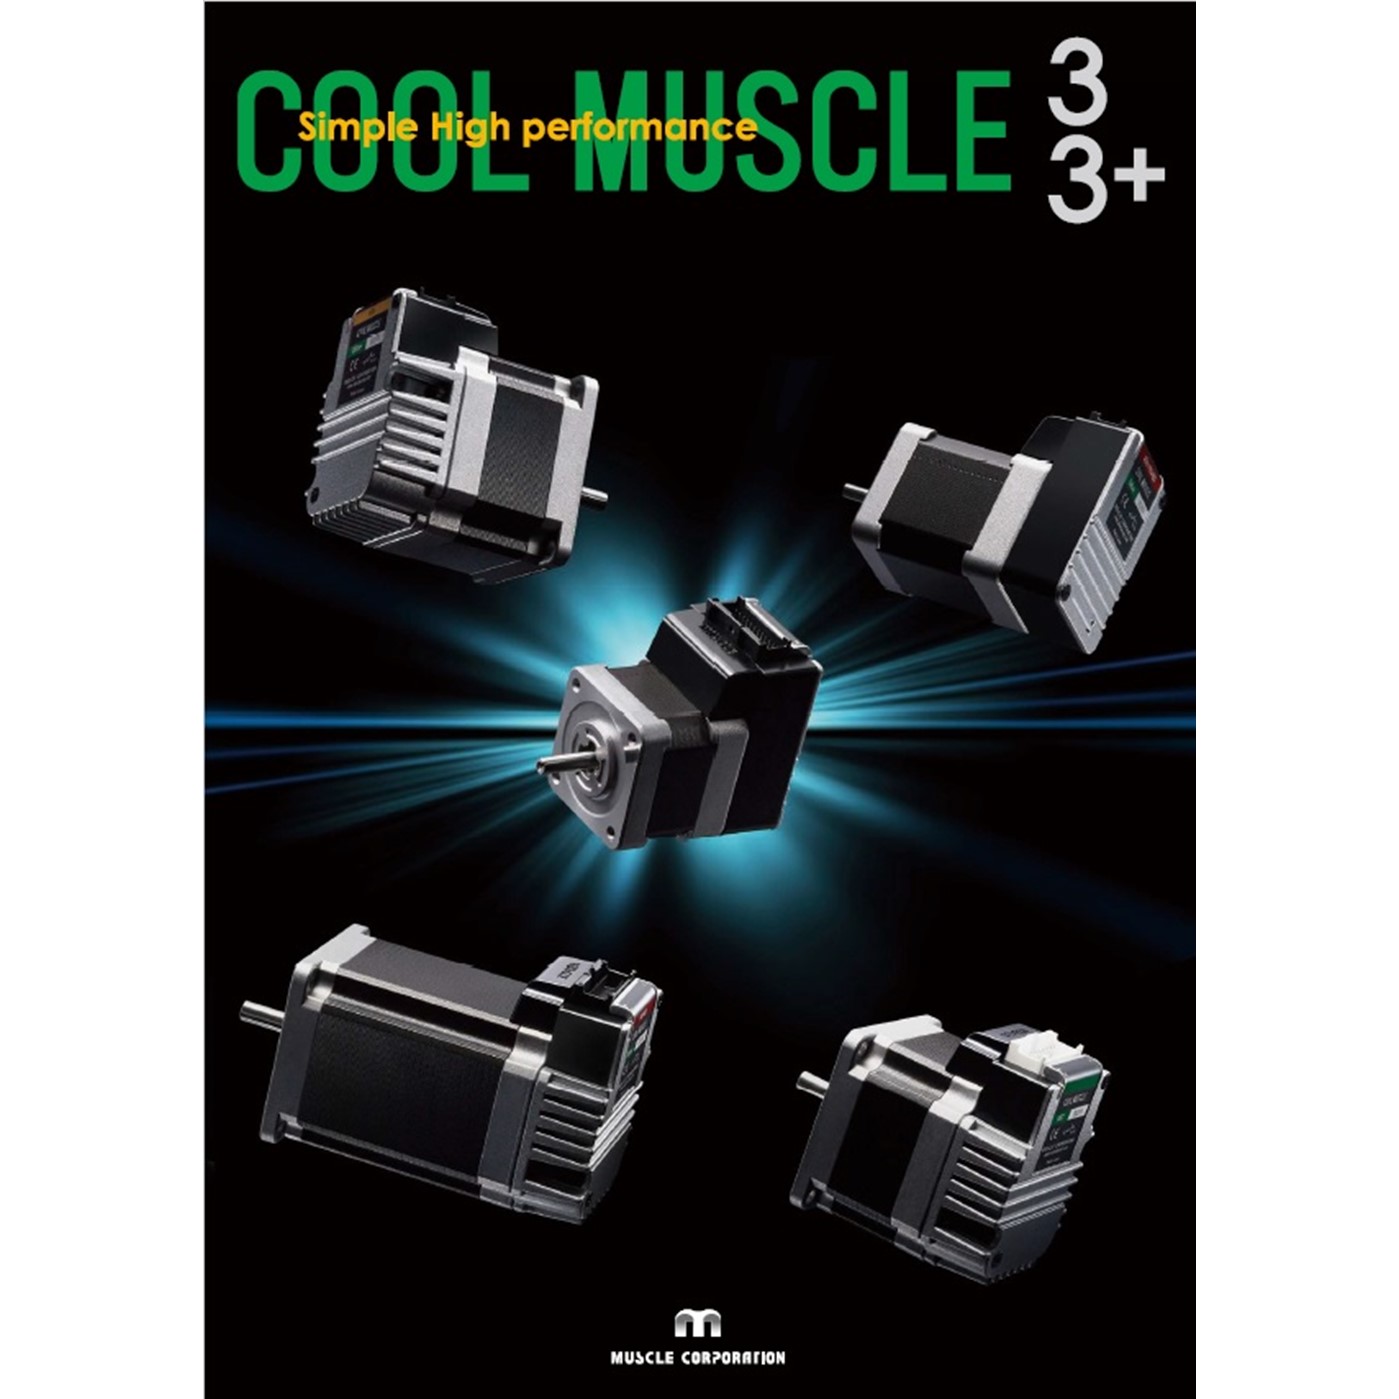 COOL MUSCLE 3, 3+ Catalog